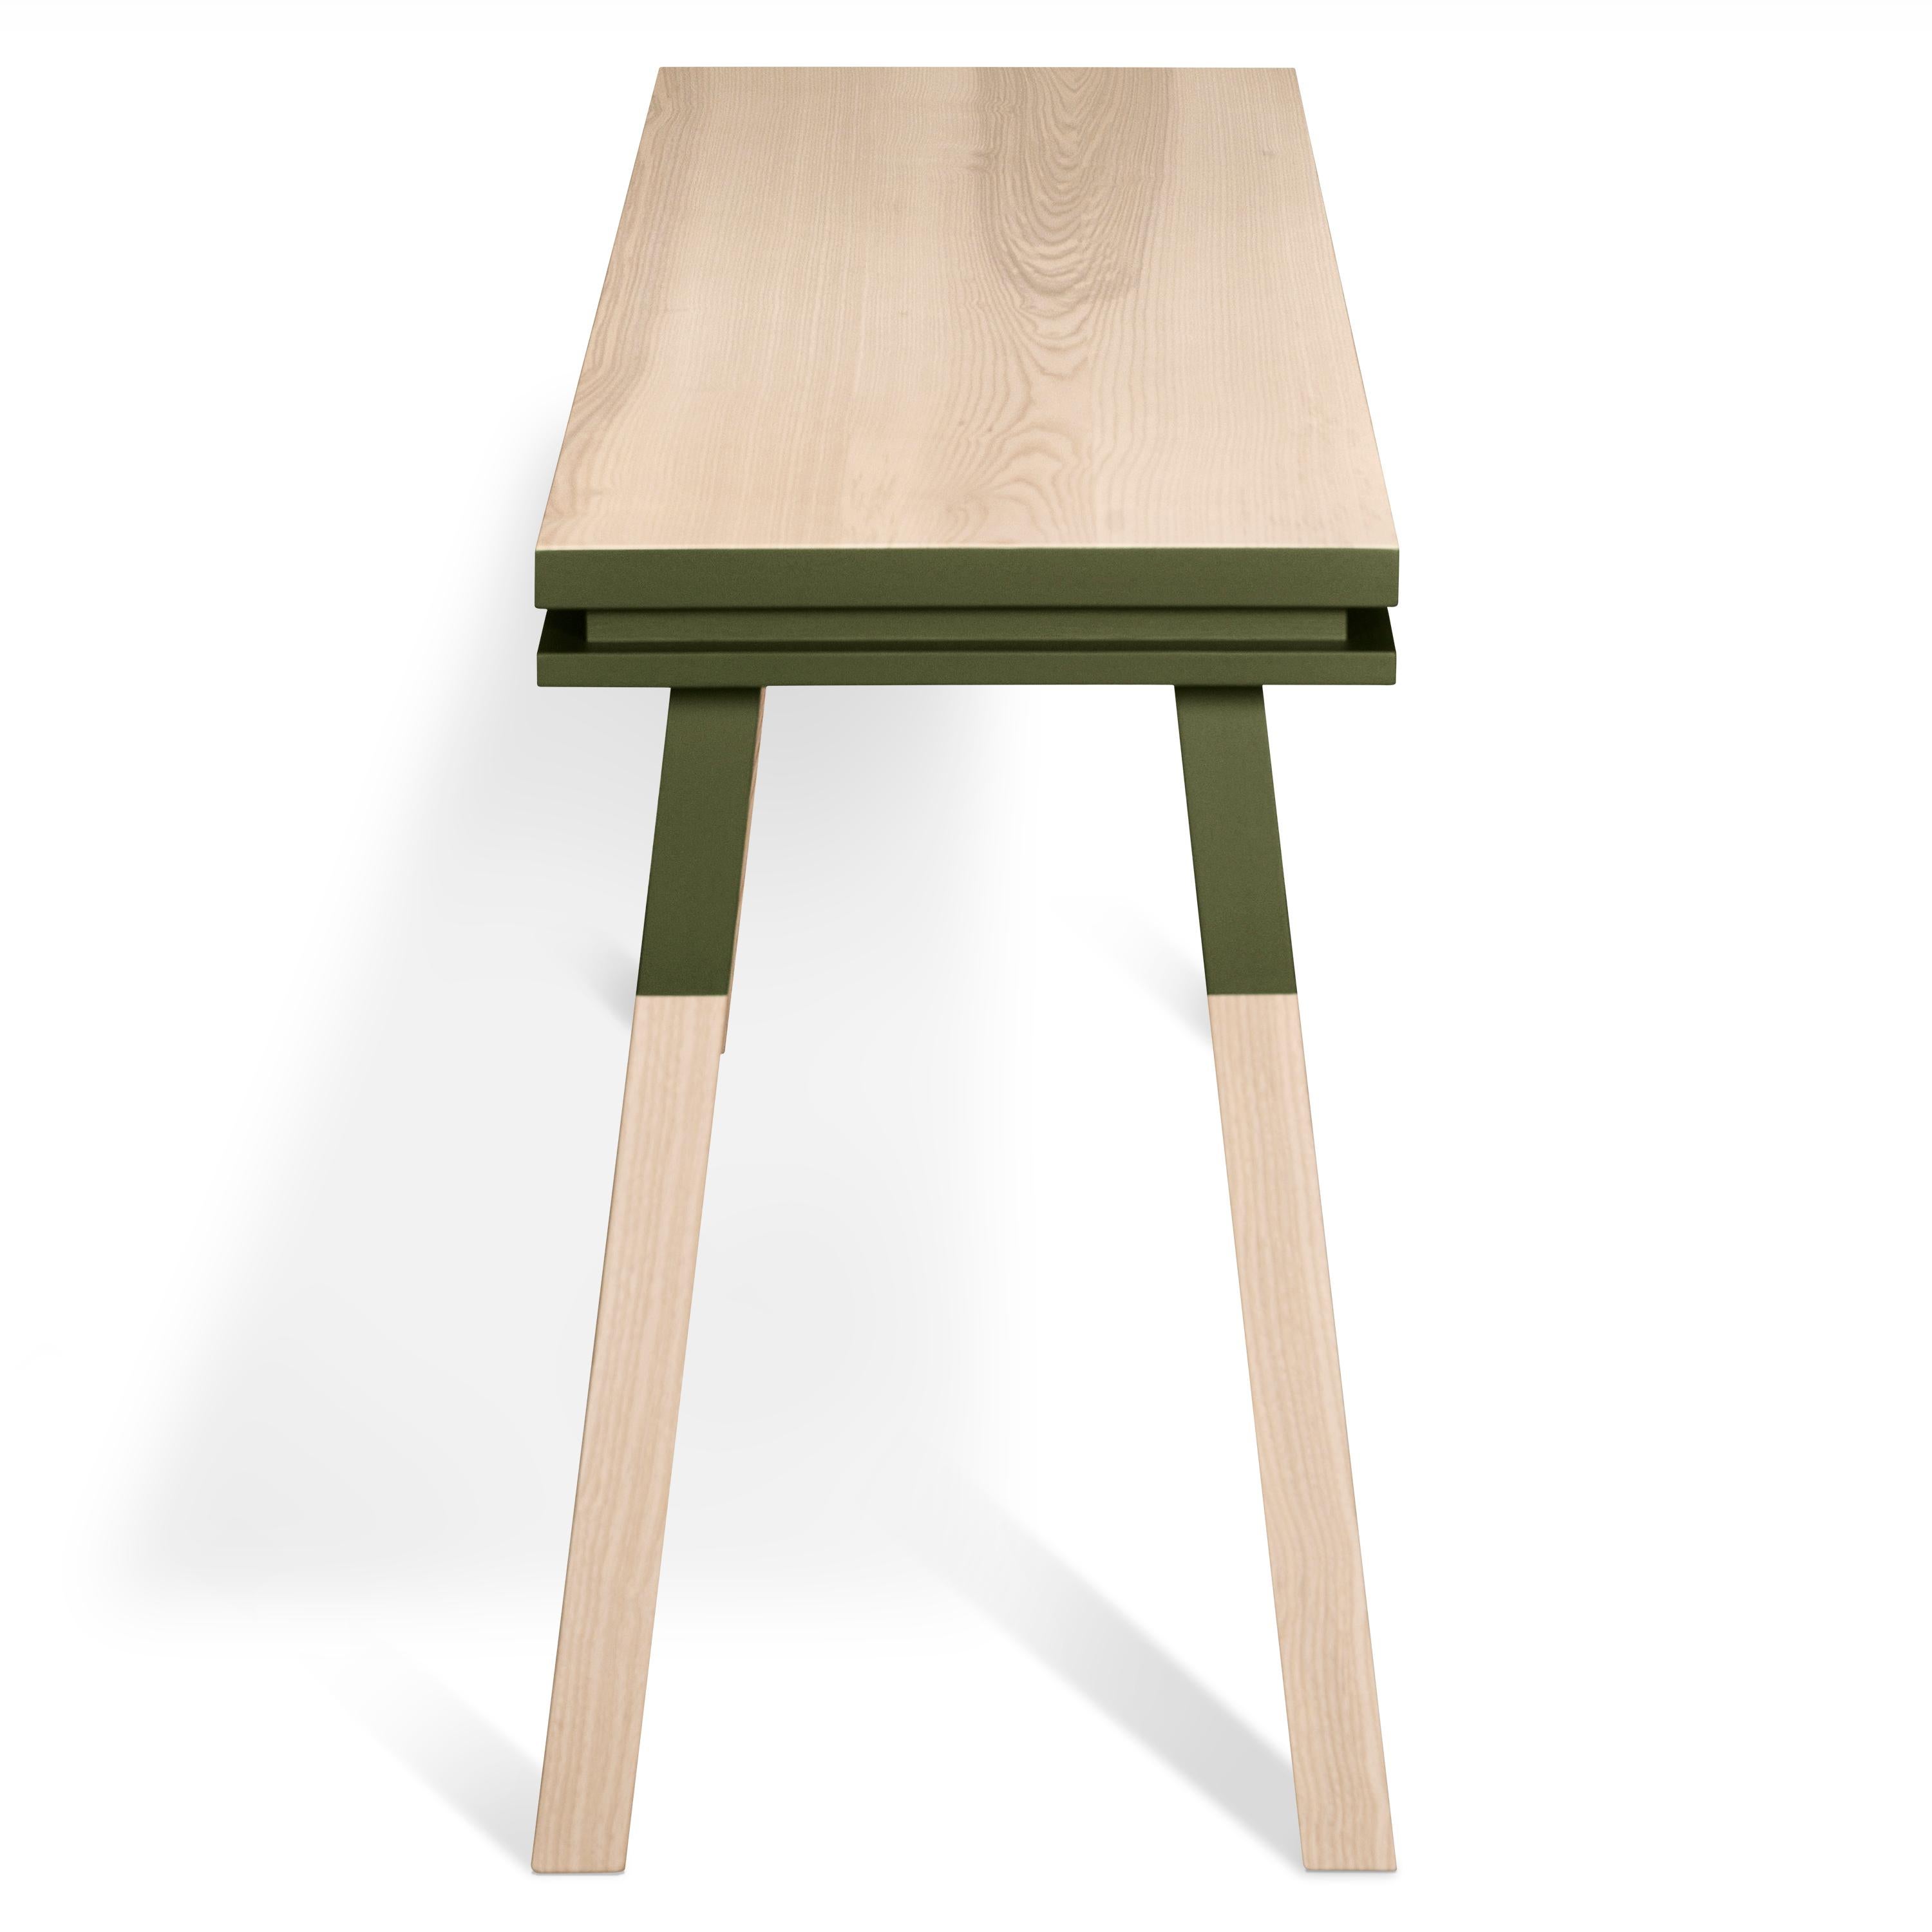 Hand-Crafted Green desk table in solid Ash, design by Eric Gizard, Paris - 11 colours For Sale